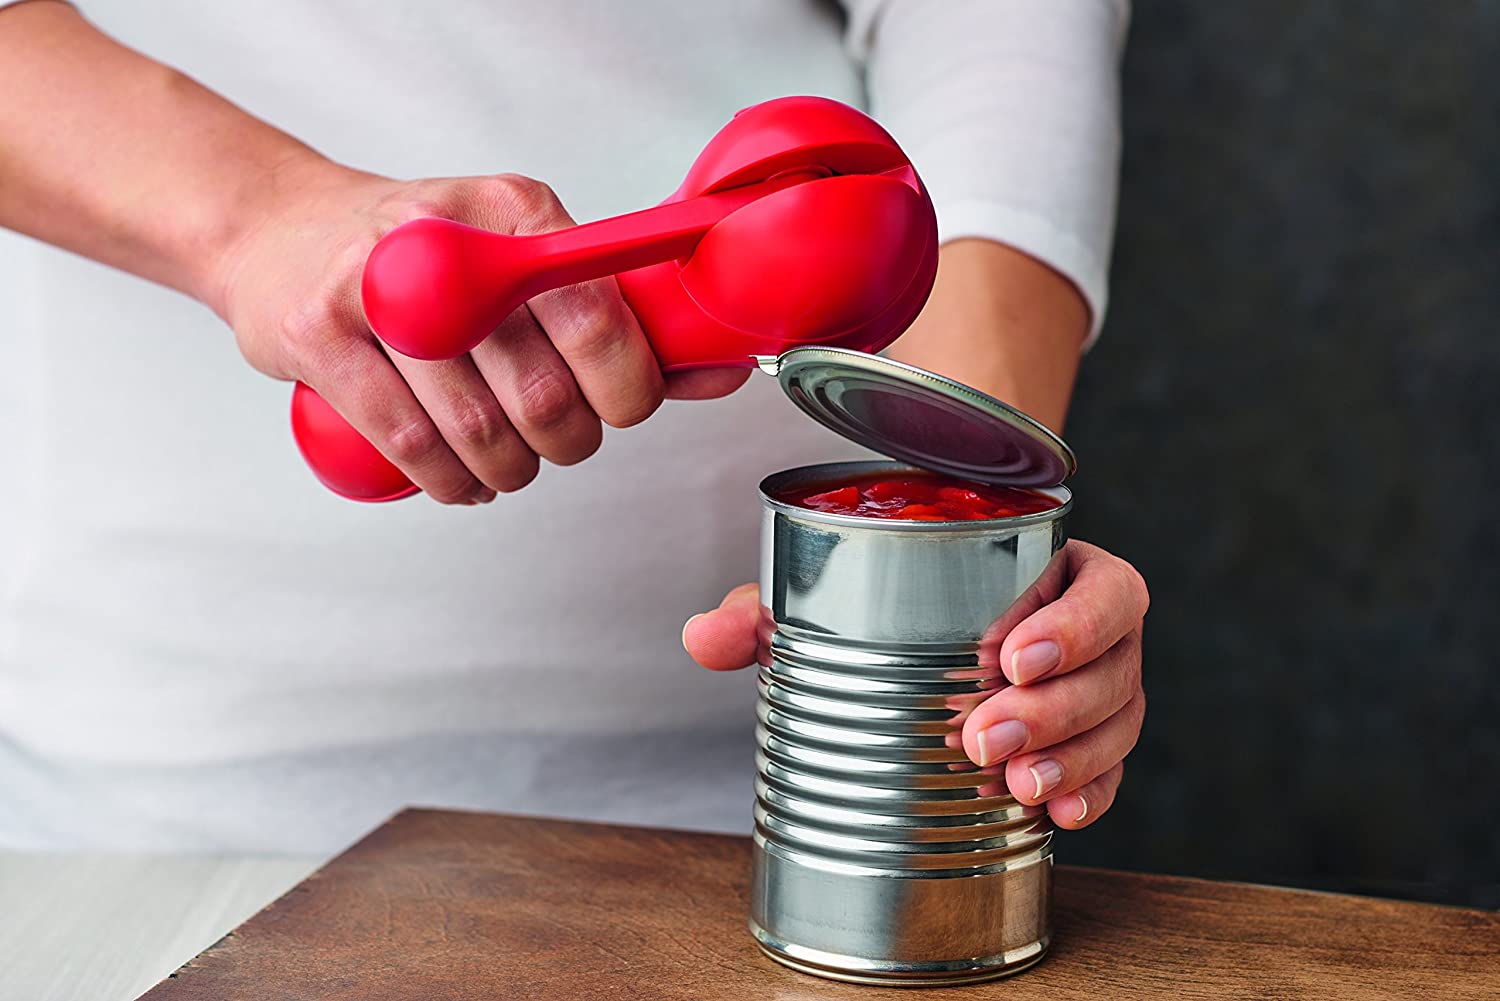 Ratchet Safety Smooth Touch Can Opener